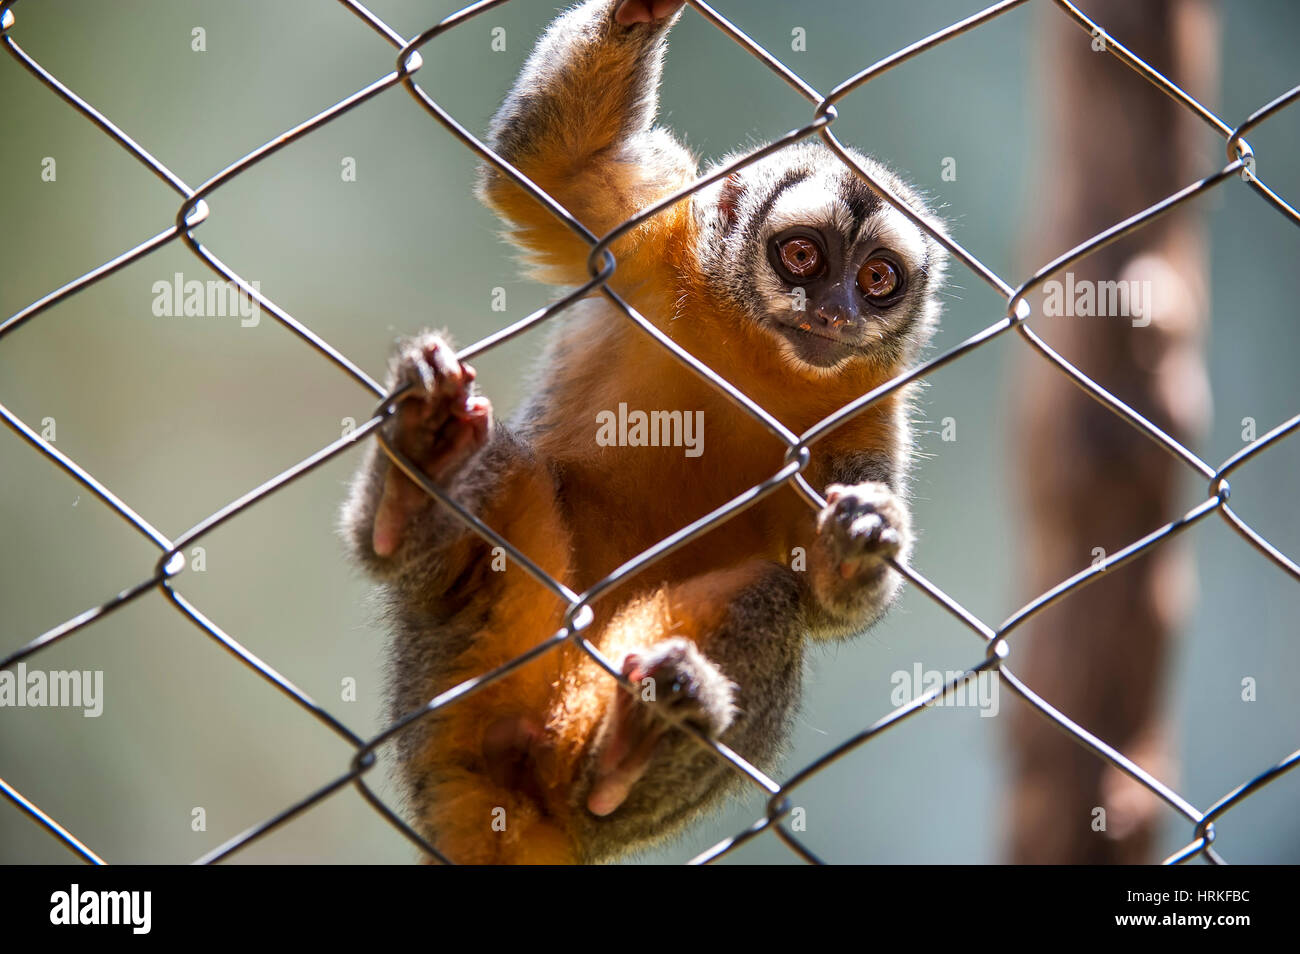 Southern night monkey (Aotus azarae), a New World Monkey Aotidae family. It occurs in Argentina, Brazil, Bolivia, Peru and Paraguay. Probable escape. Stock Photo